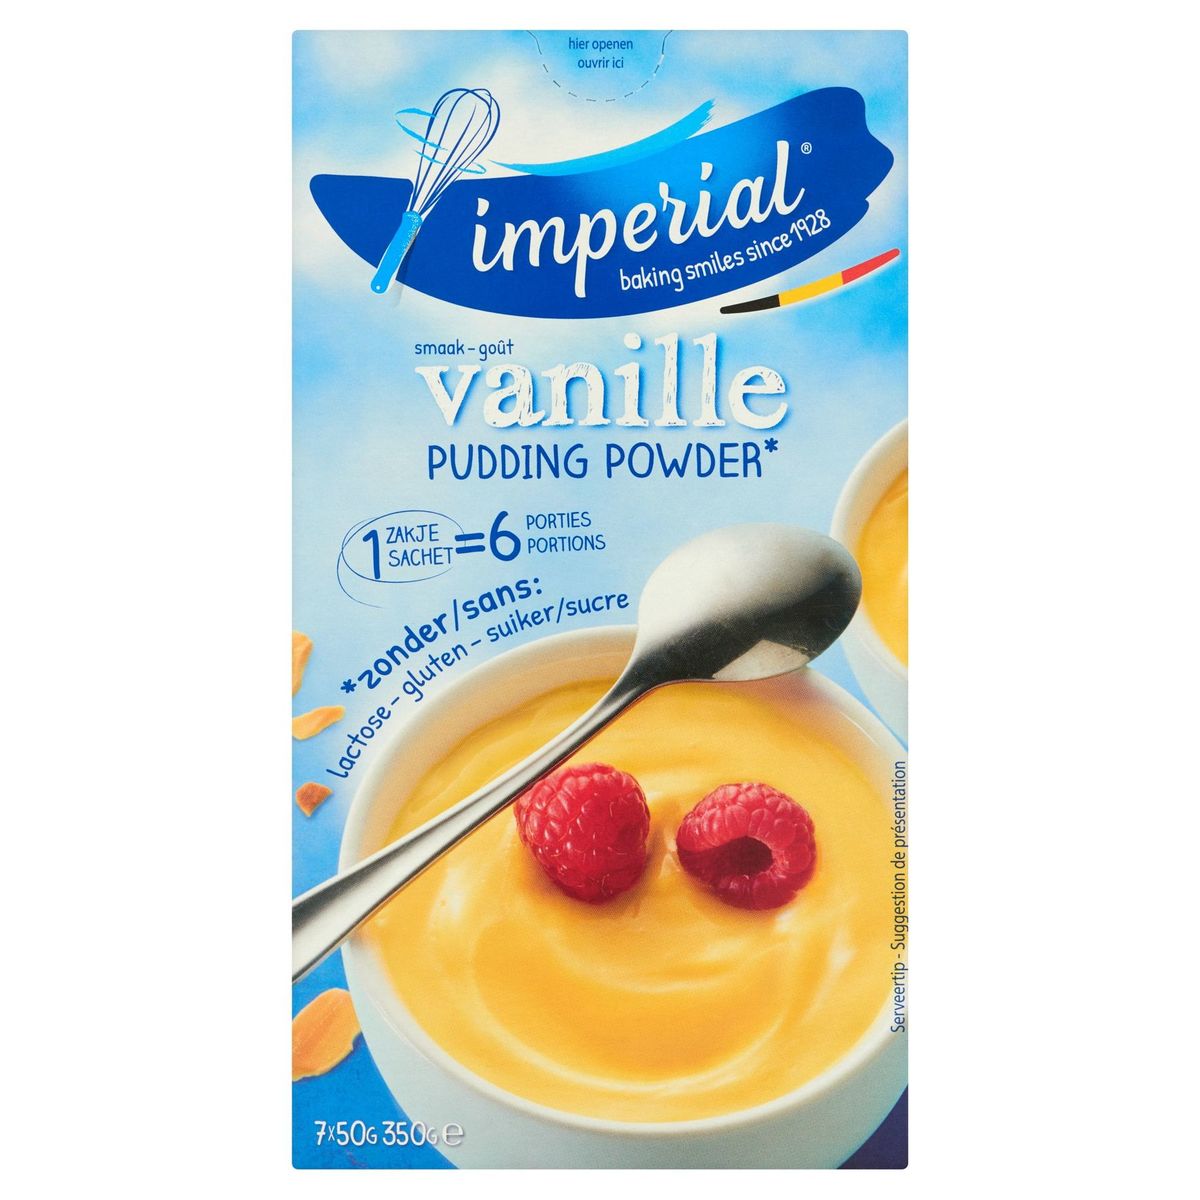 Imperial Pudding Powder Pudding Vanille 7 x 50 g